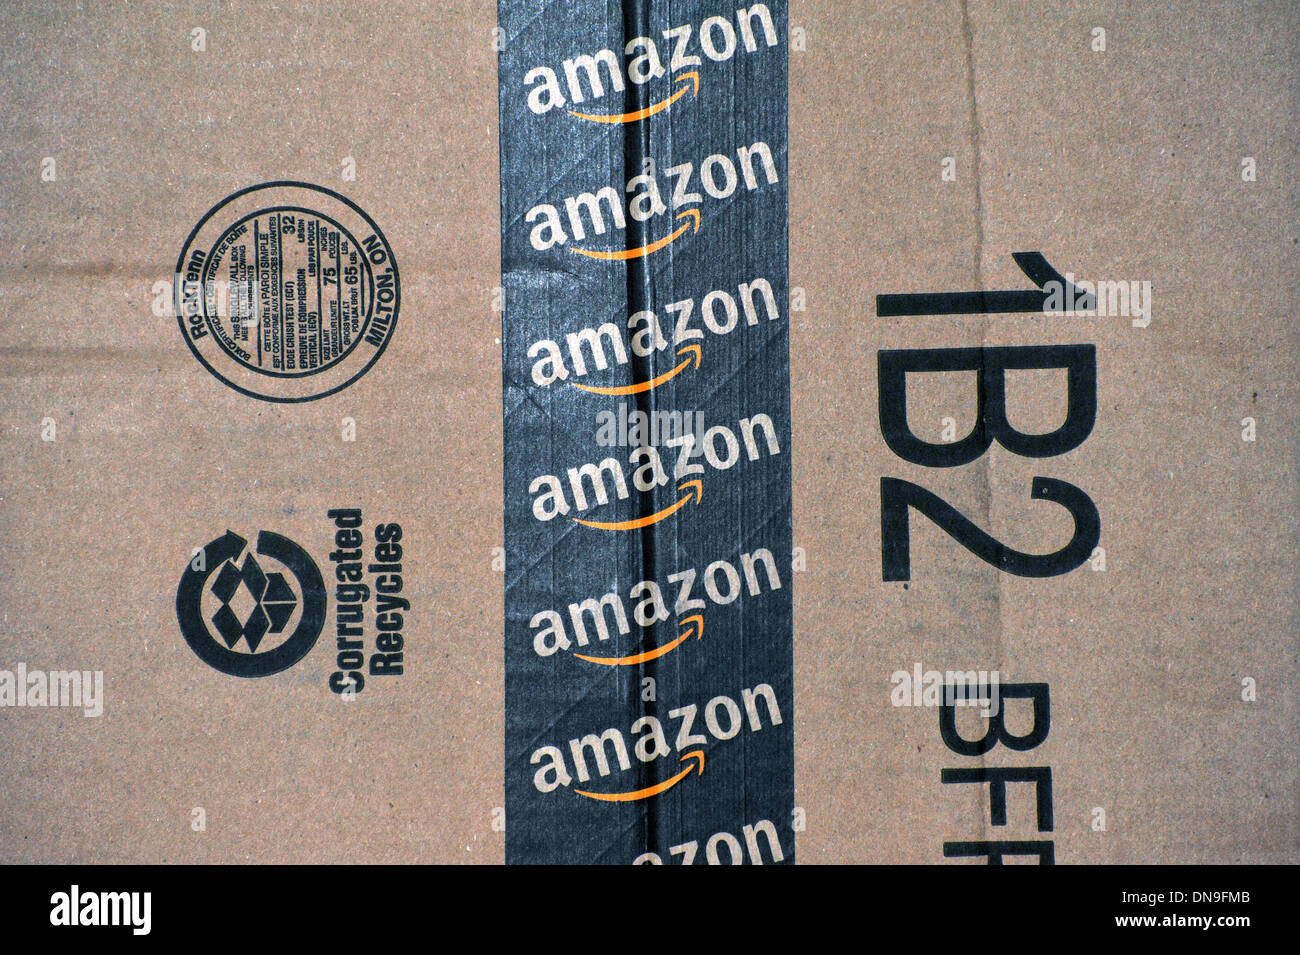 Amazon Tape High Resolution Stock Photography and Images - Alamy